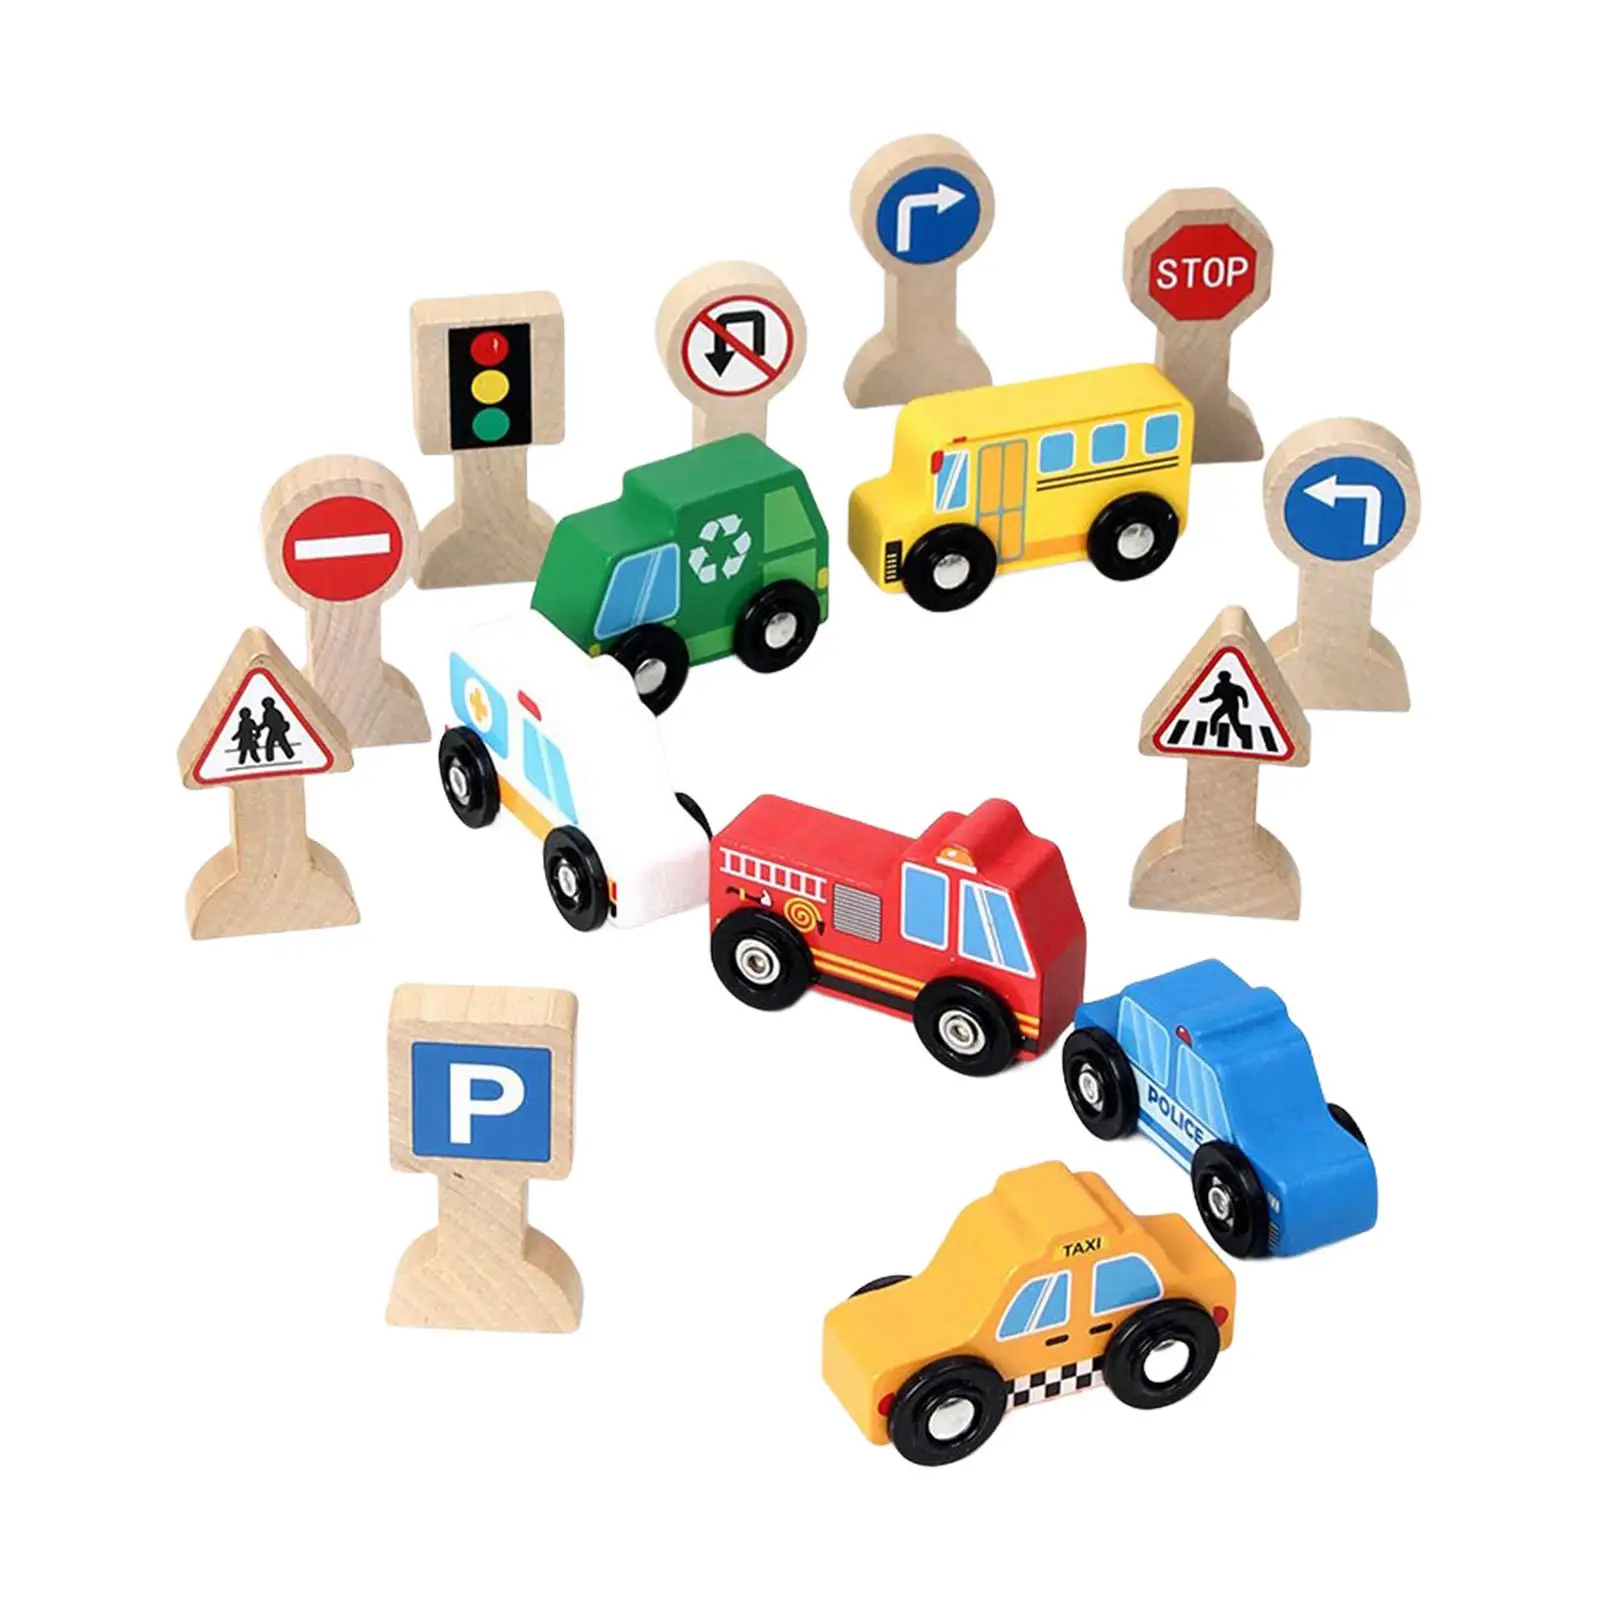 Wooden Cars Toys Wooden Street Signs Playset Educational Toy Mini Toy Vehicles for Boys Children Toddlers Kids Holiday Gifts